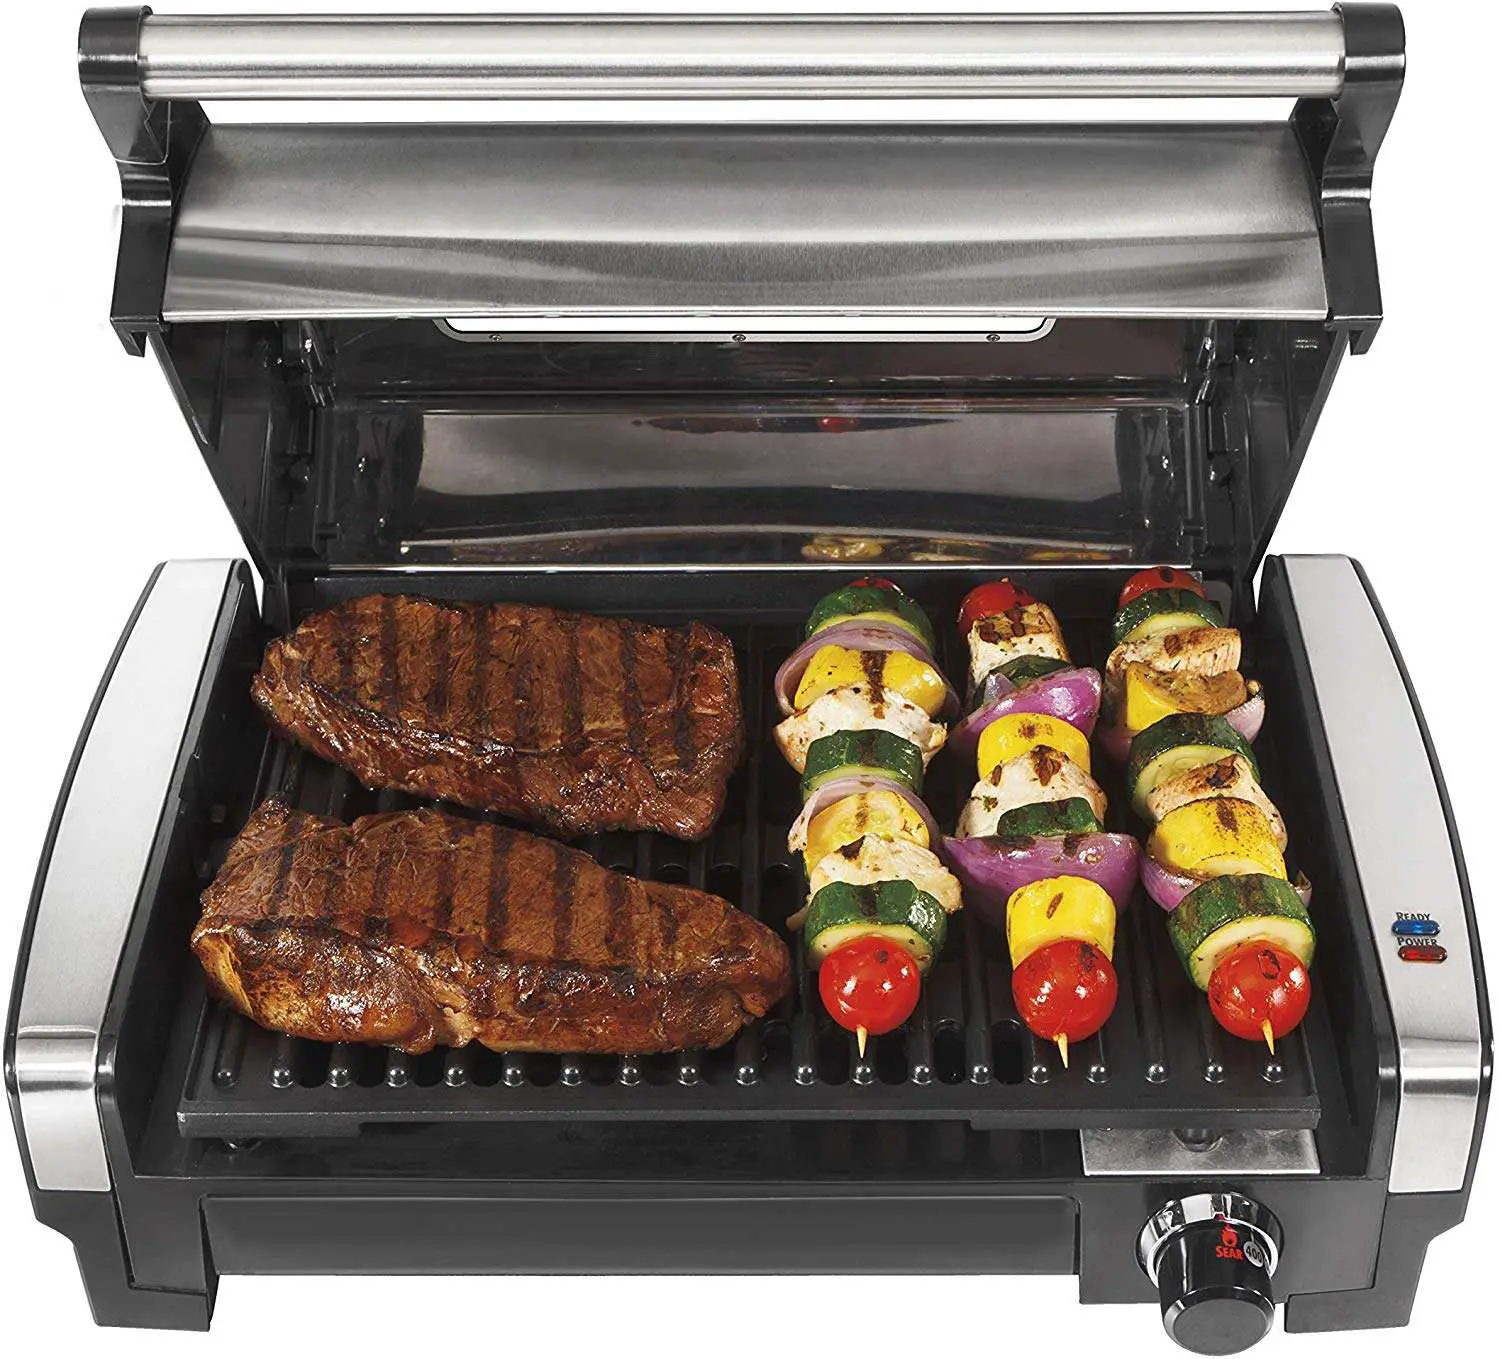 Top 10 Best Power Smokeless Grill 2020 Review